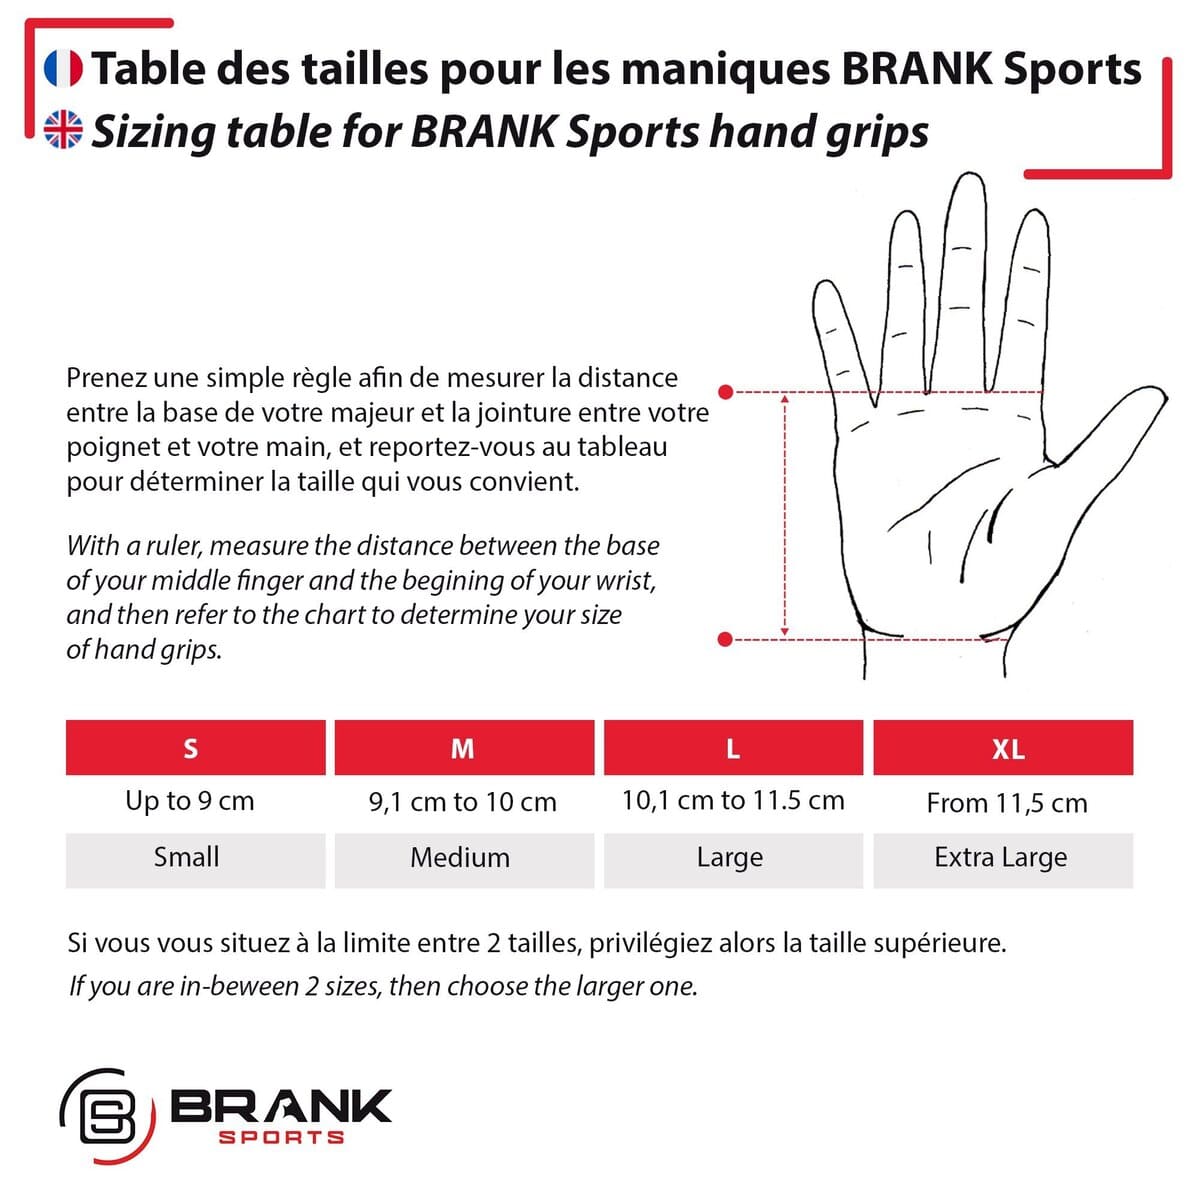 Guide taille pour maniques BRANK Sports